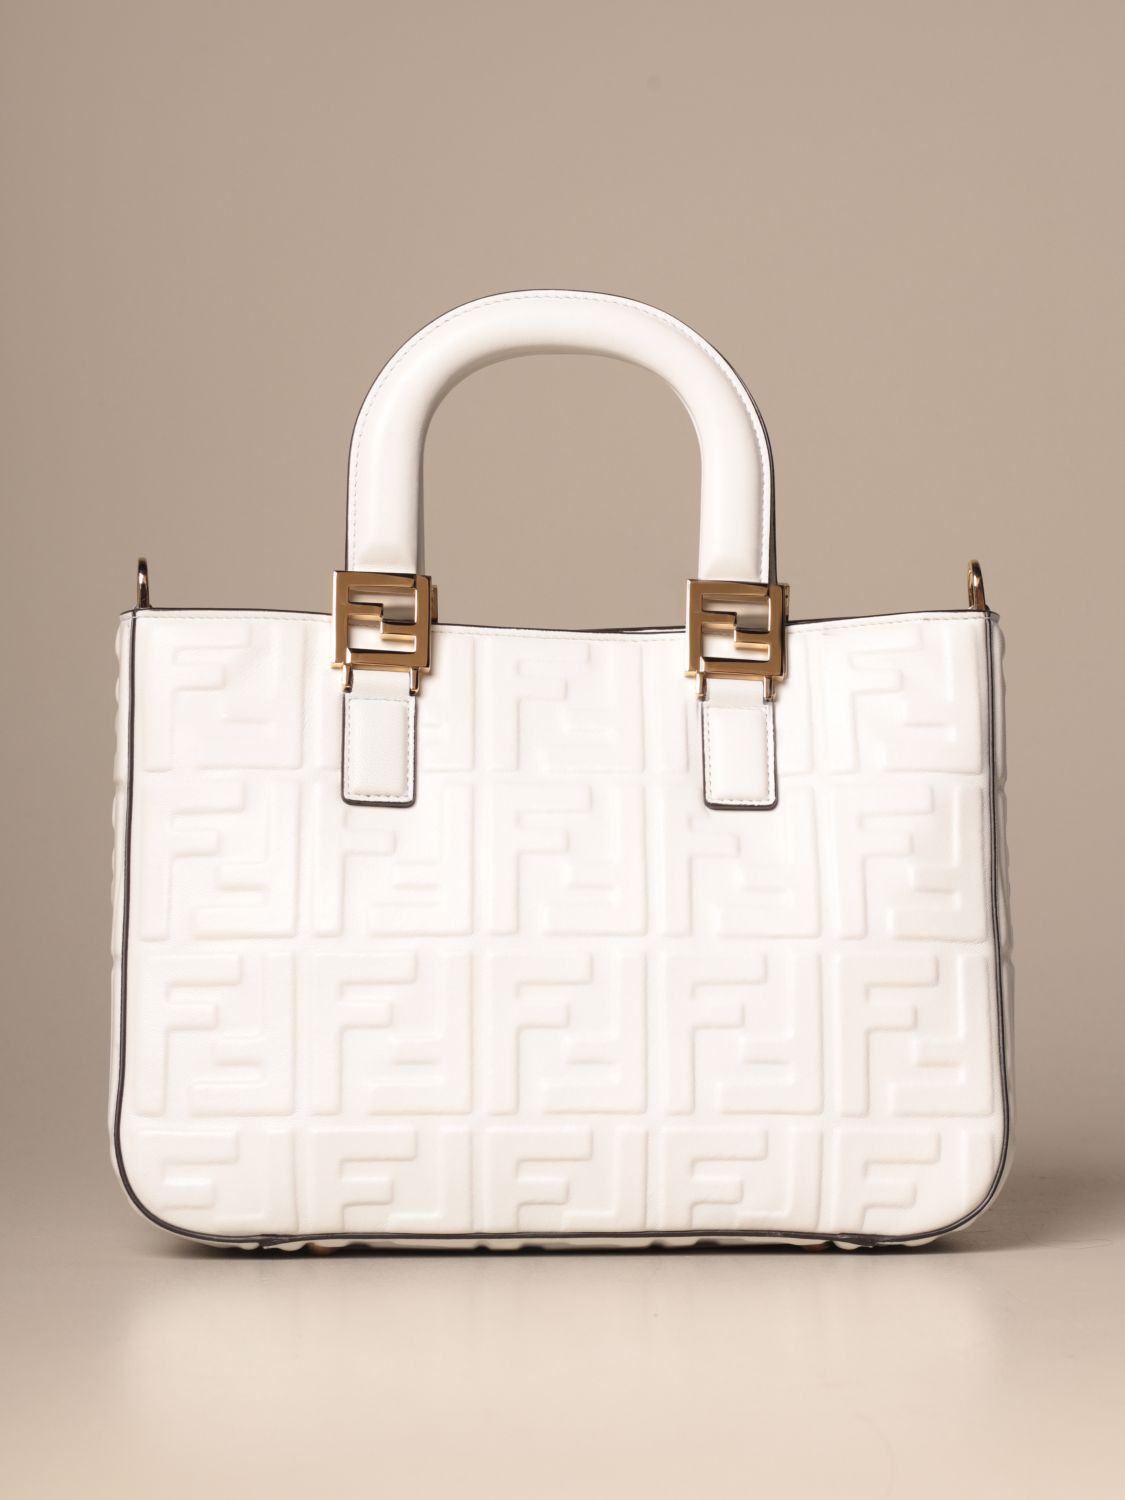 FENDI: leather bag with embossed all-over FF logo | Tote Bags Fendi ...